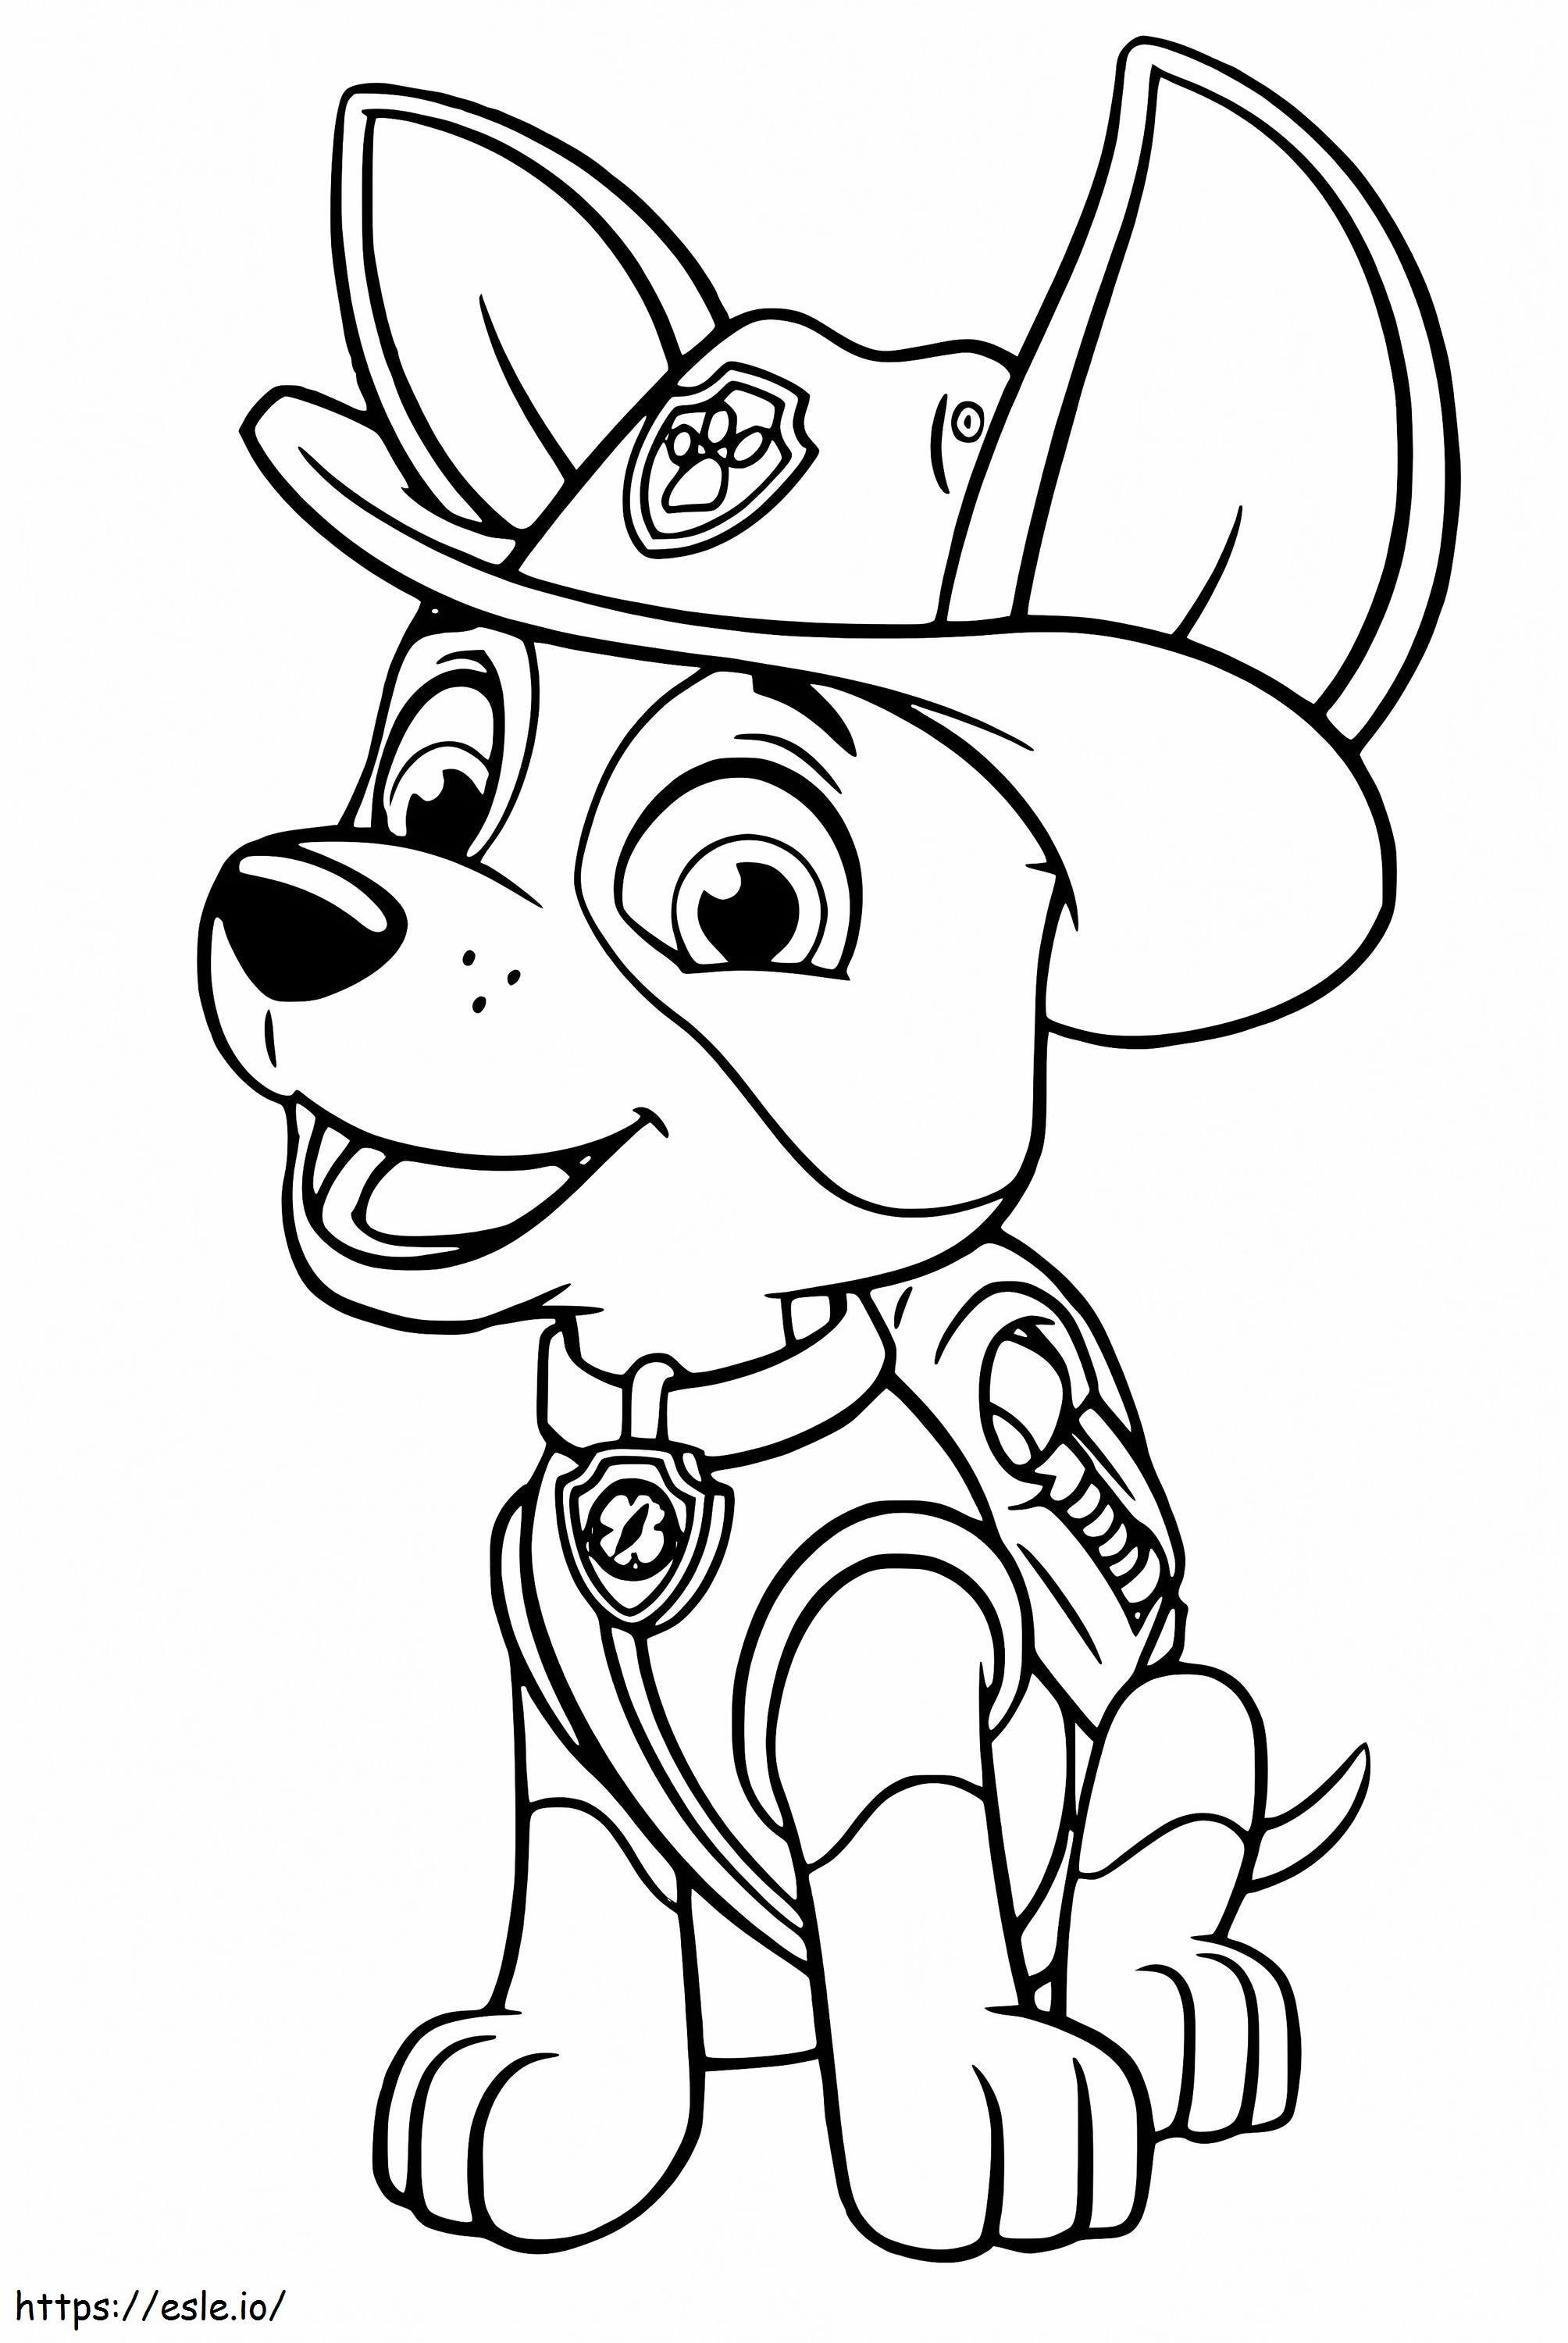 Cute Tracker coloring page